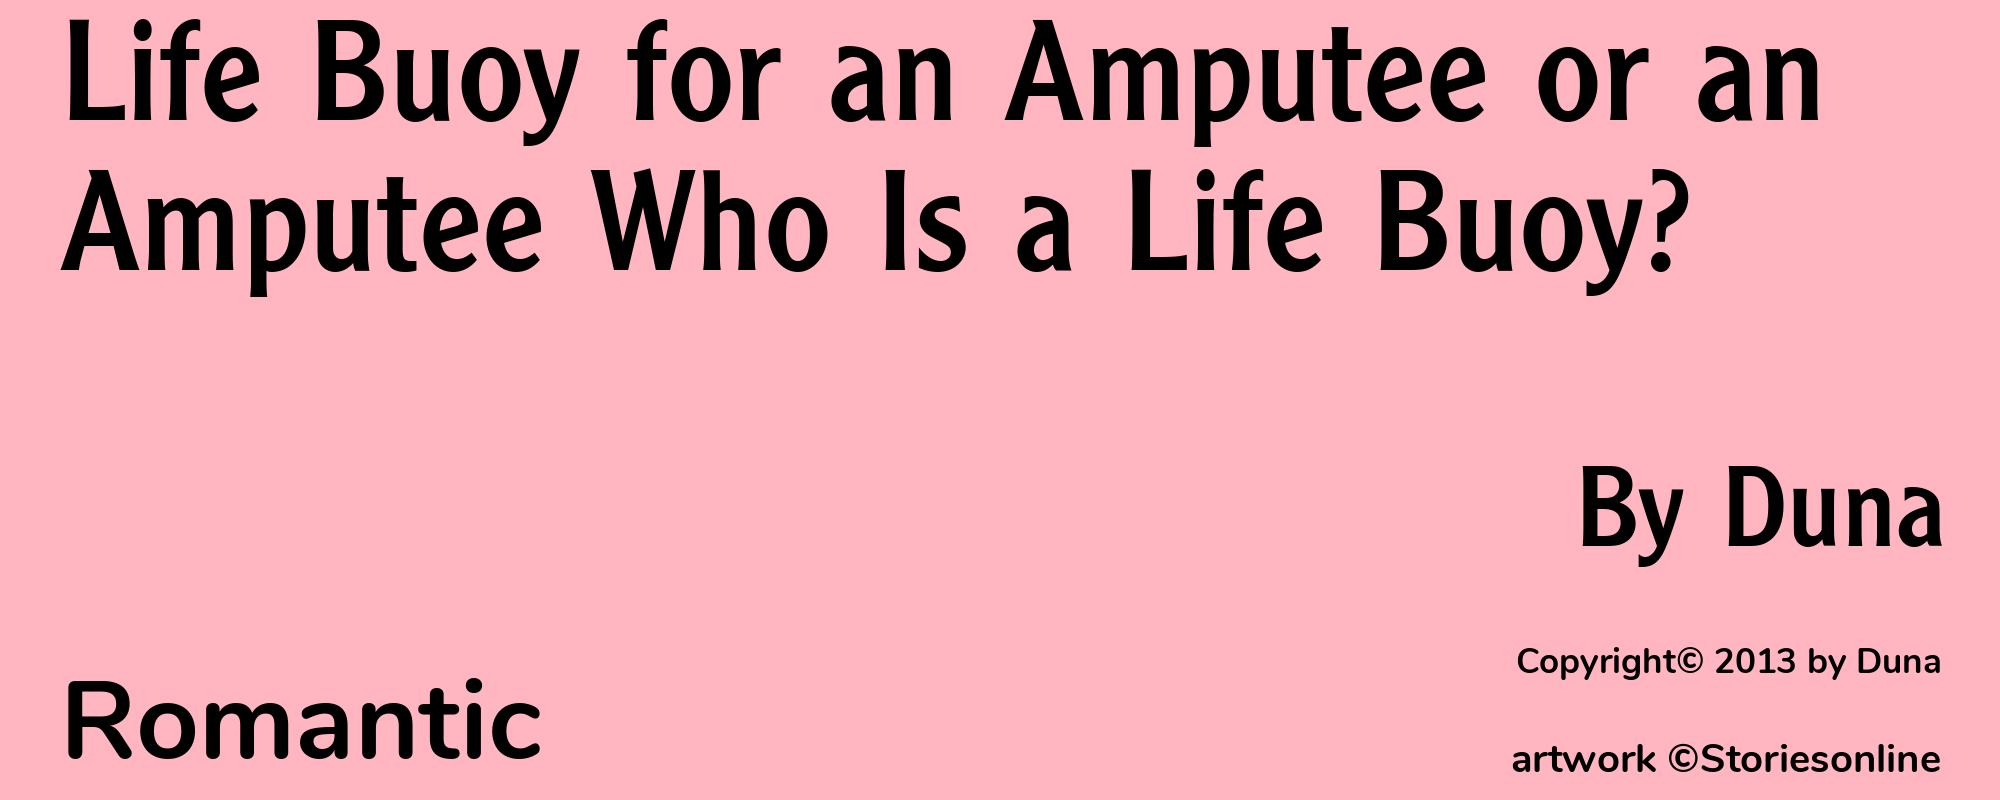 Life Buoy for an Amputee or an Amputee Who Is a Life Buoy? - Cover